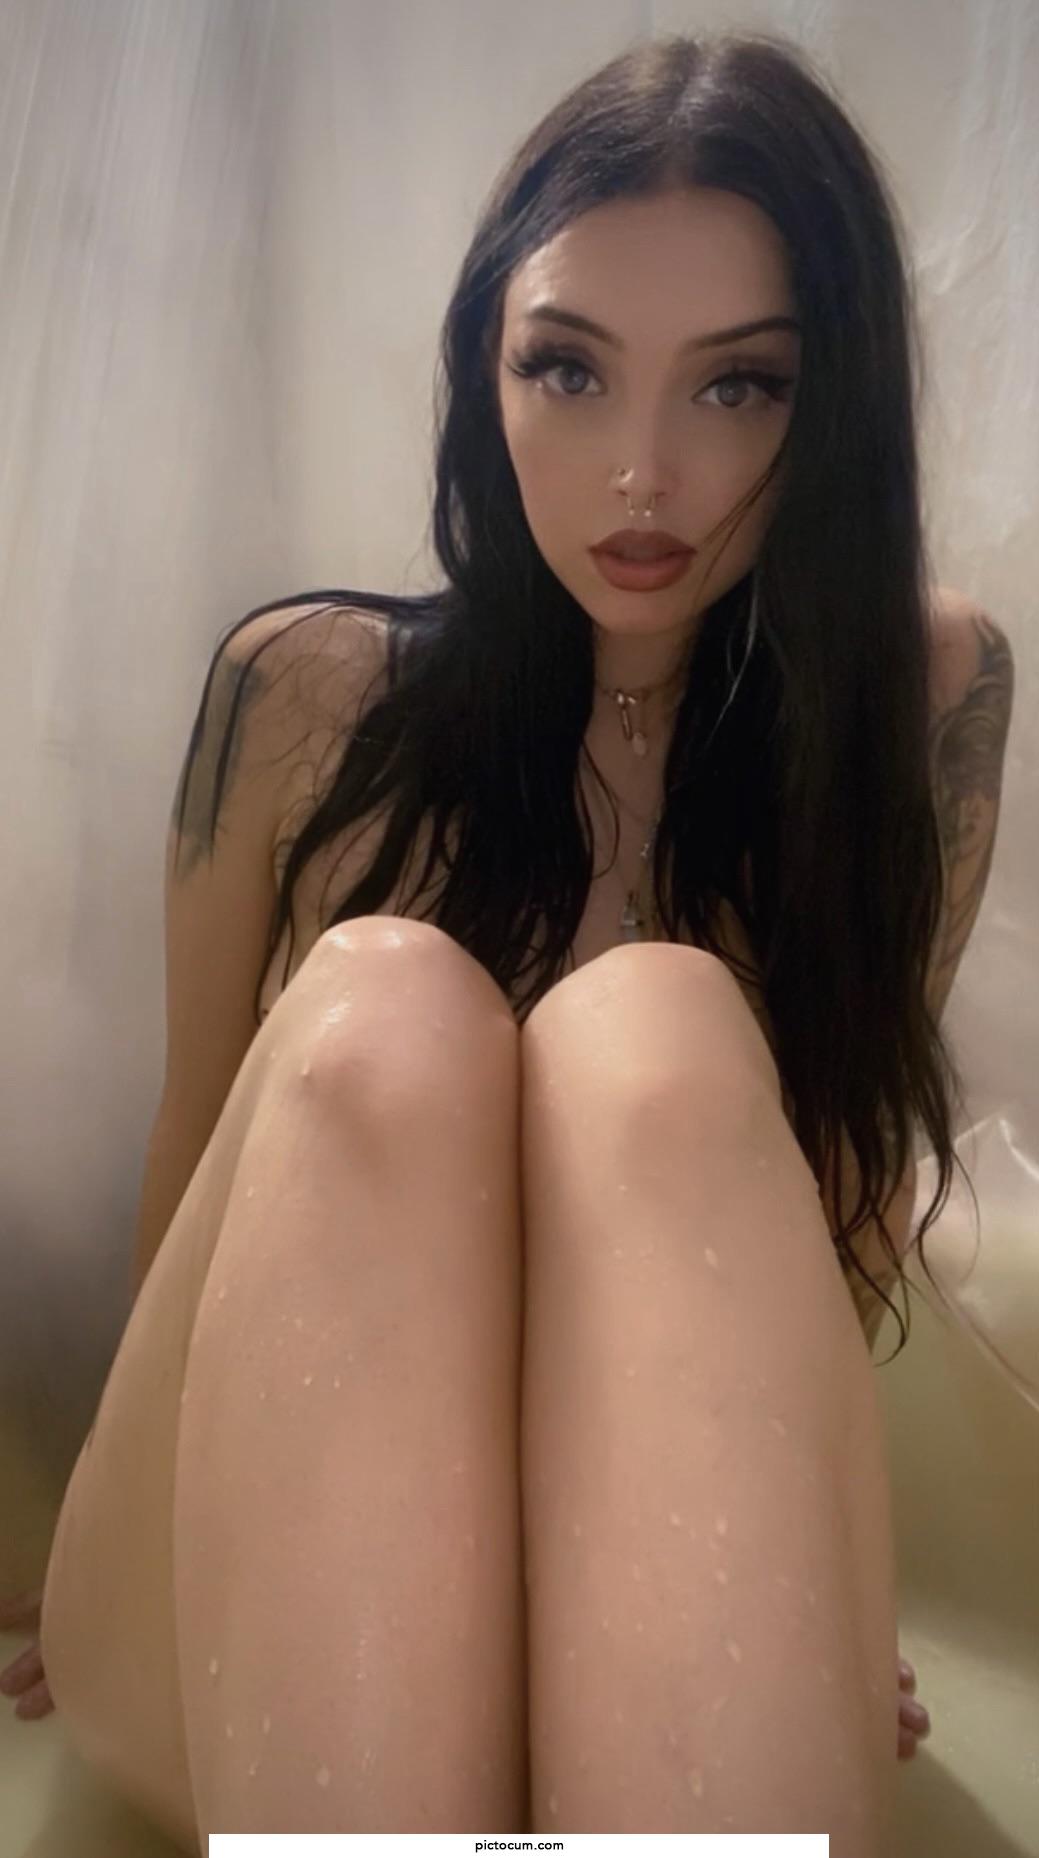 Come shower with me? 💕